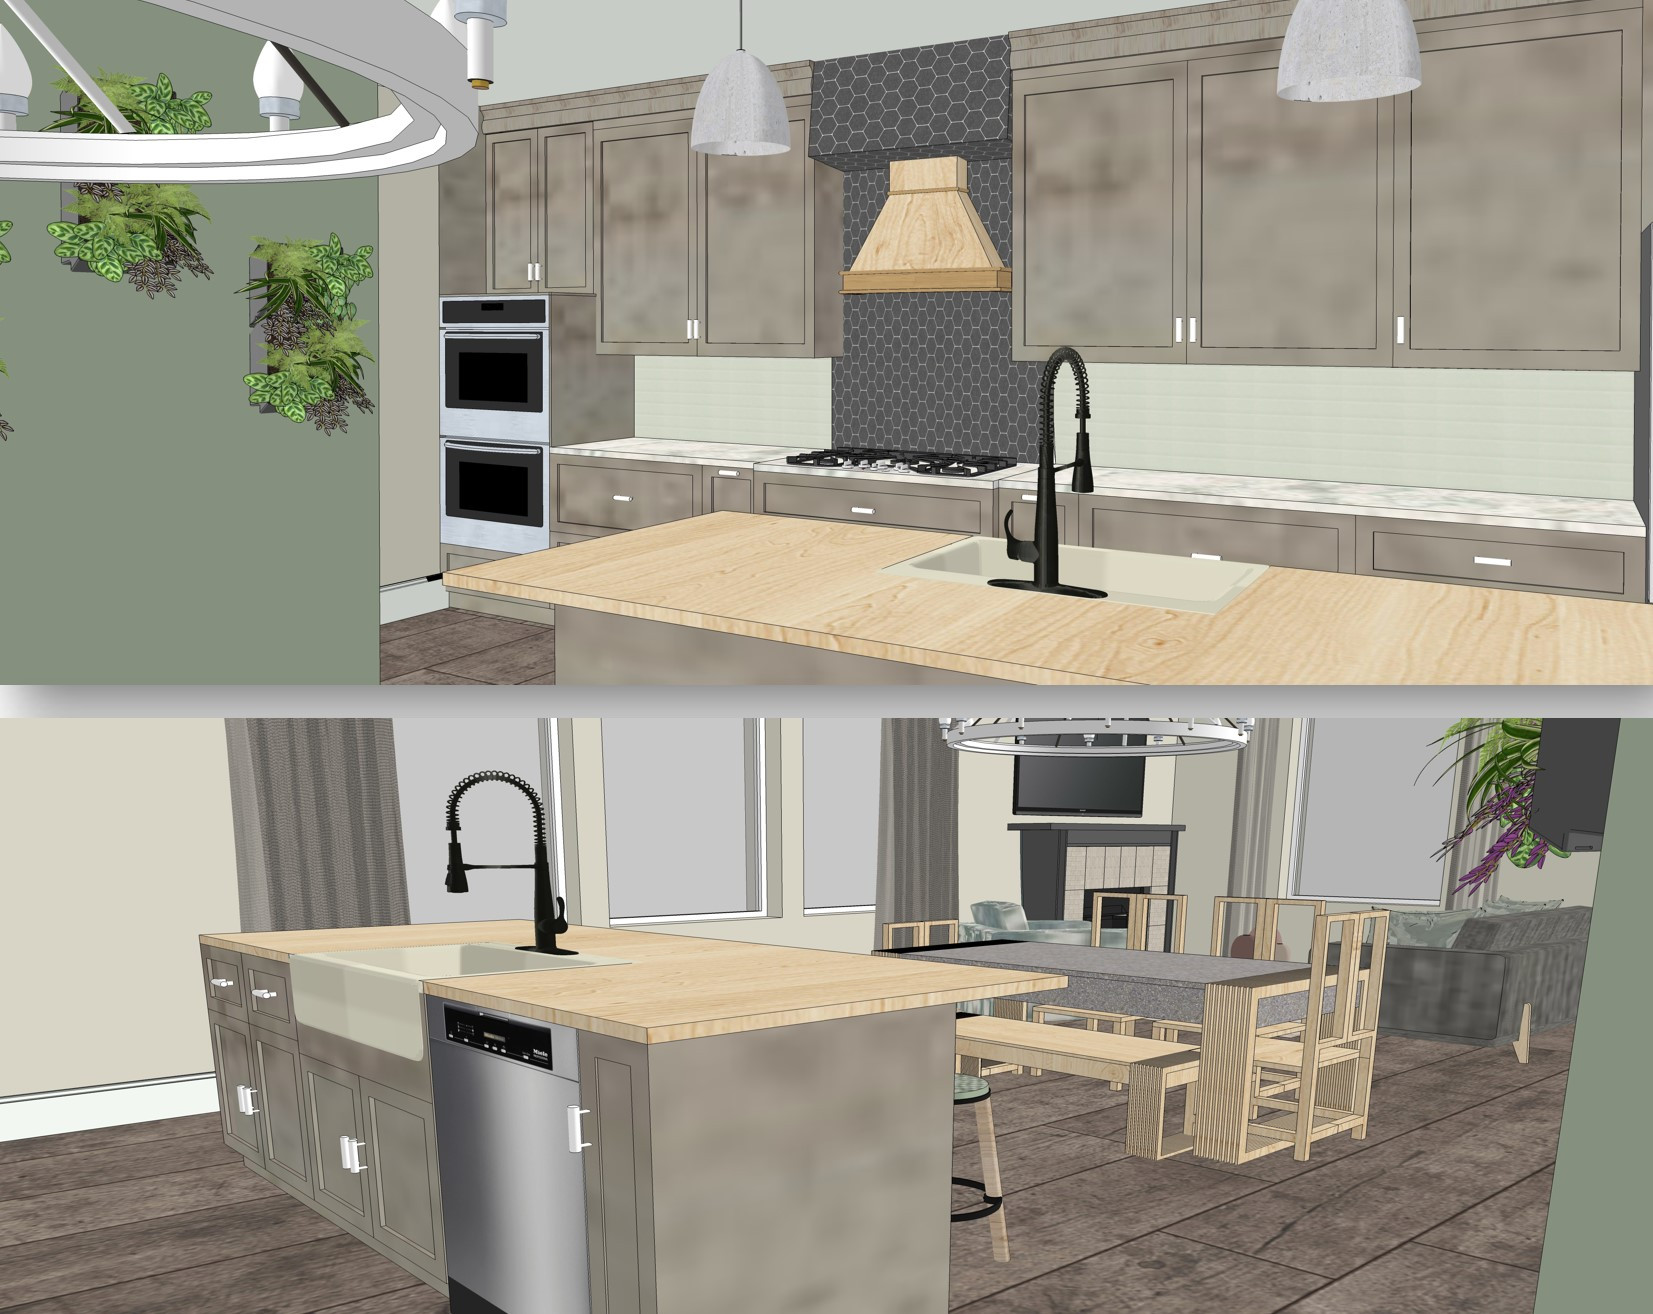 3D Example from Jacqueline Culp's Portfolio Love Your Home Interiors Cheyney PA